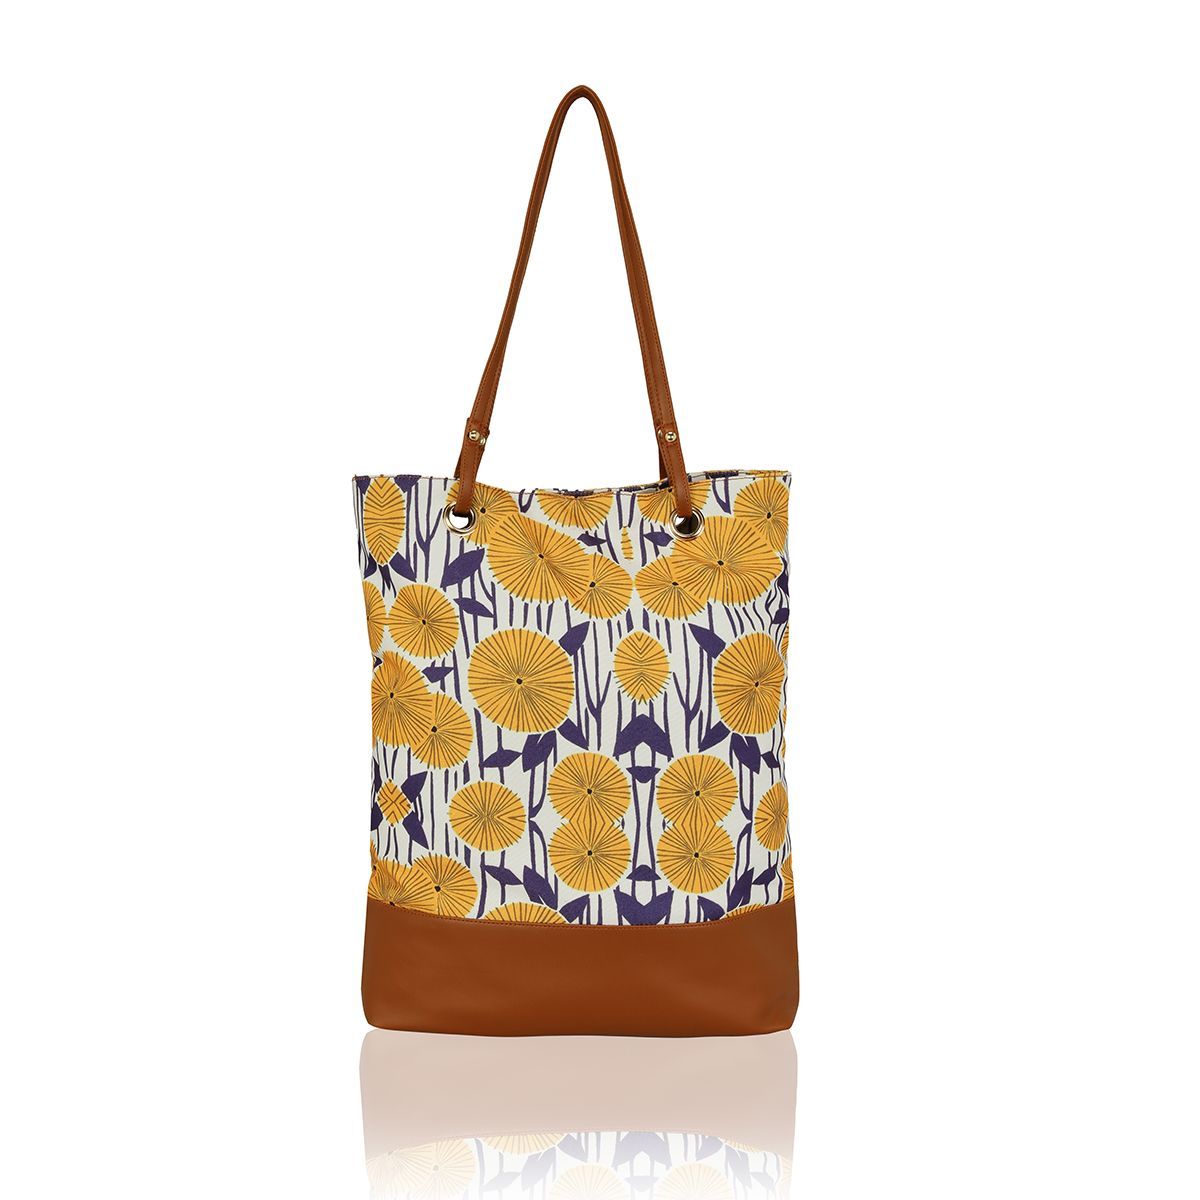 Buy Tote Bags For Women At Best Prices Online In India  Tata CLiQ